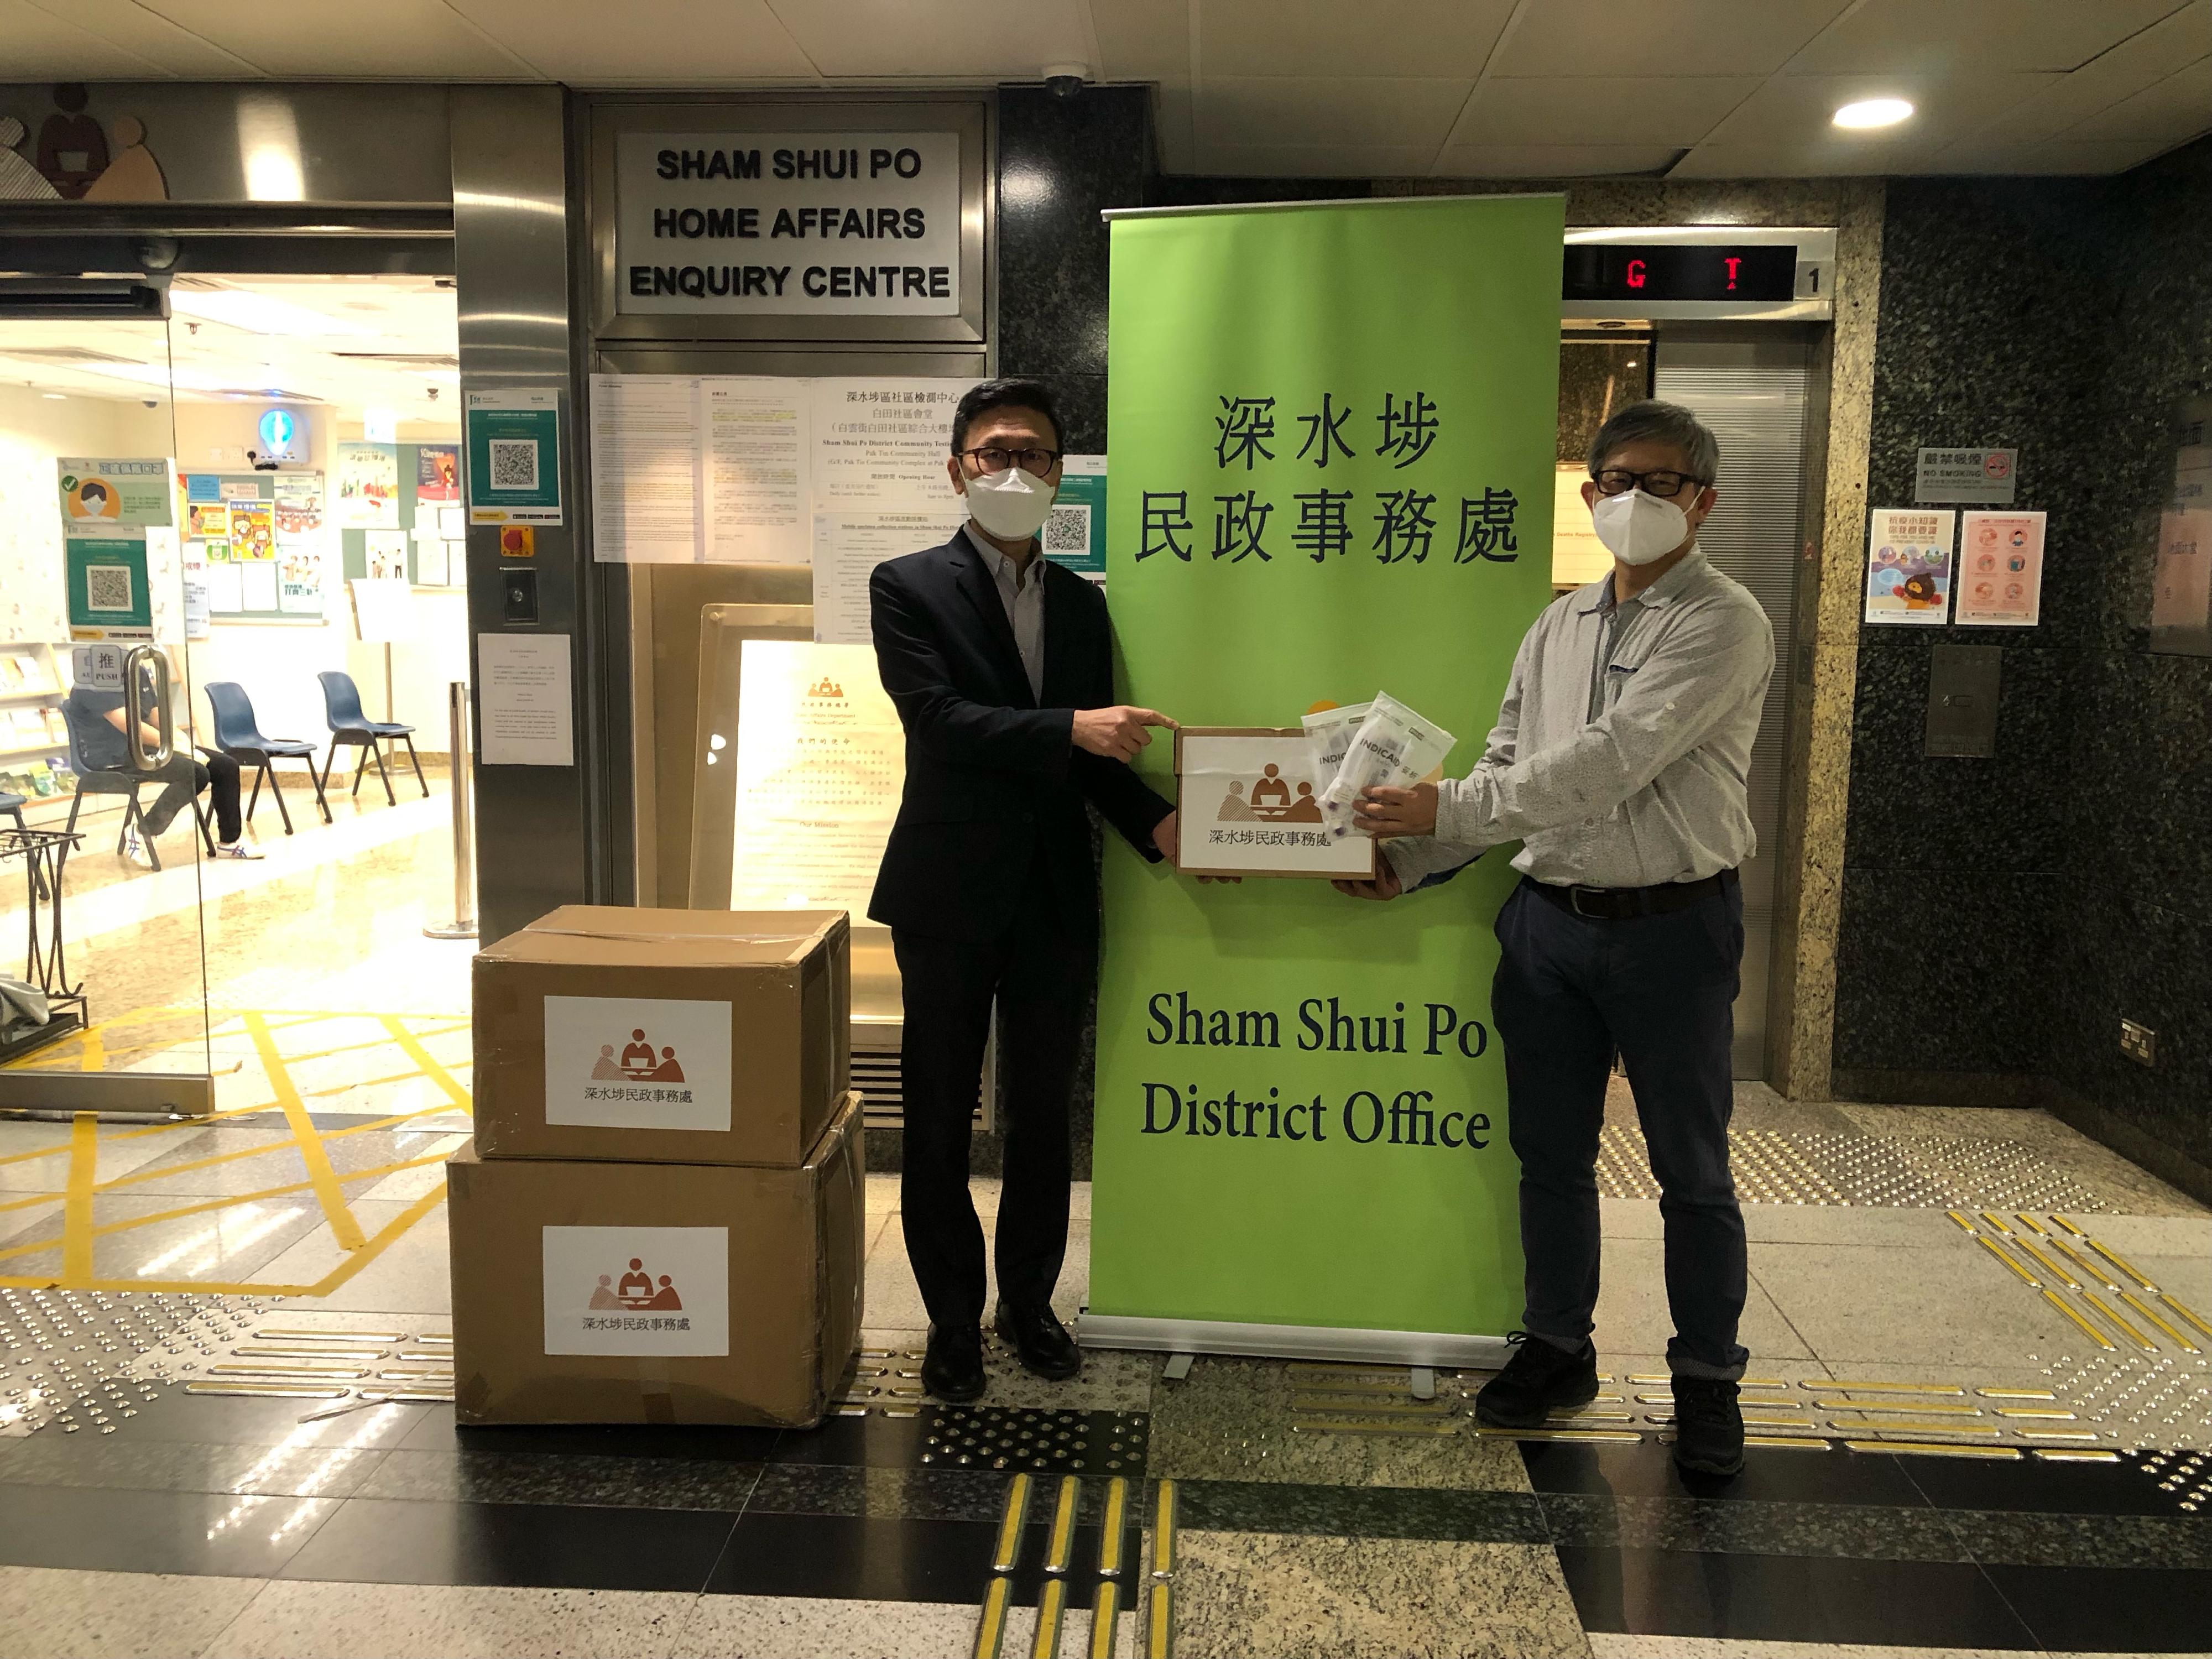 The Sham Shui Po District Office today (May 11) distributed COVID-19 rapid test kits to households, cleansing workers and property management staff living and working in Wing Lung Building for voluntary testing through the owners' corporation.